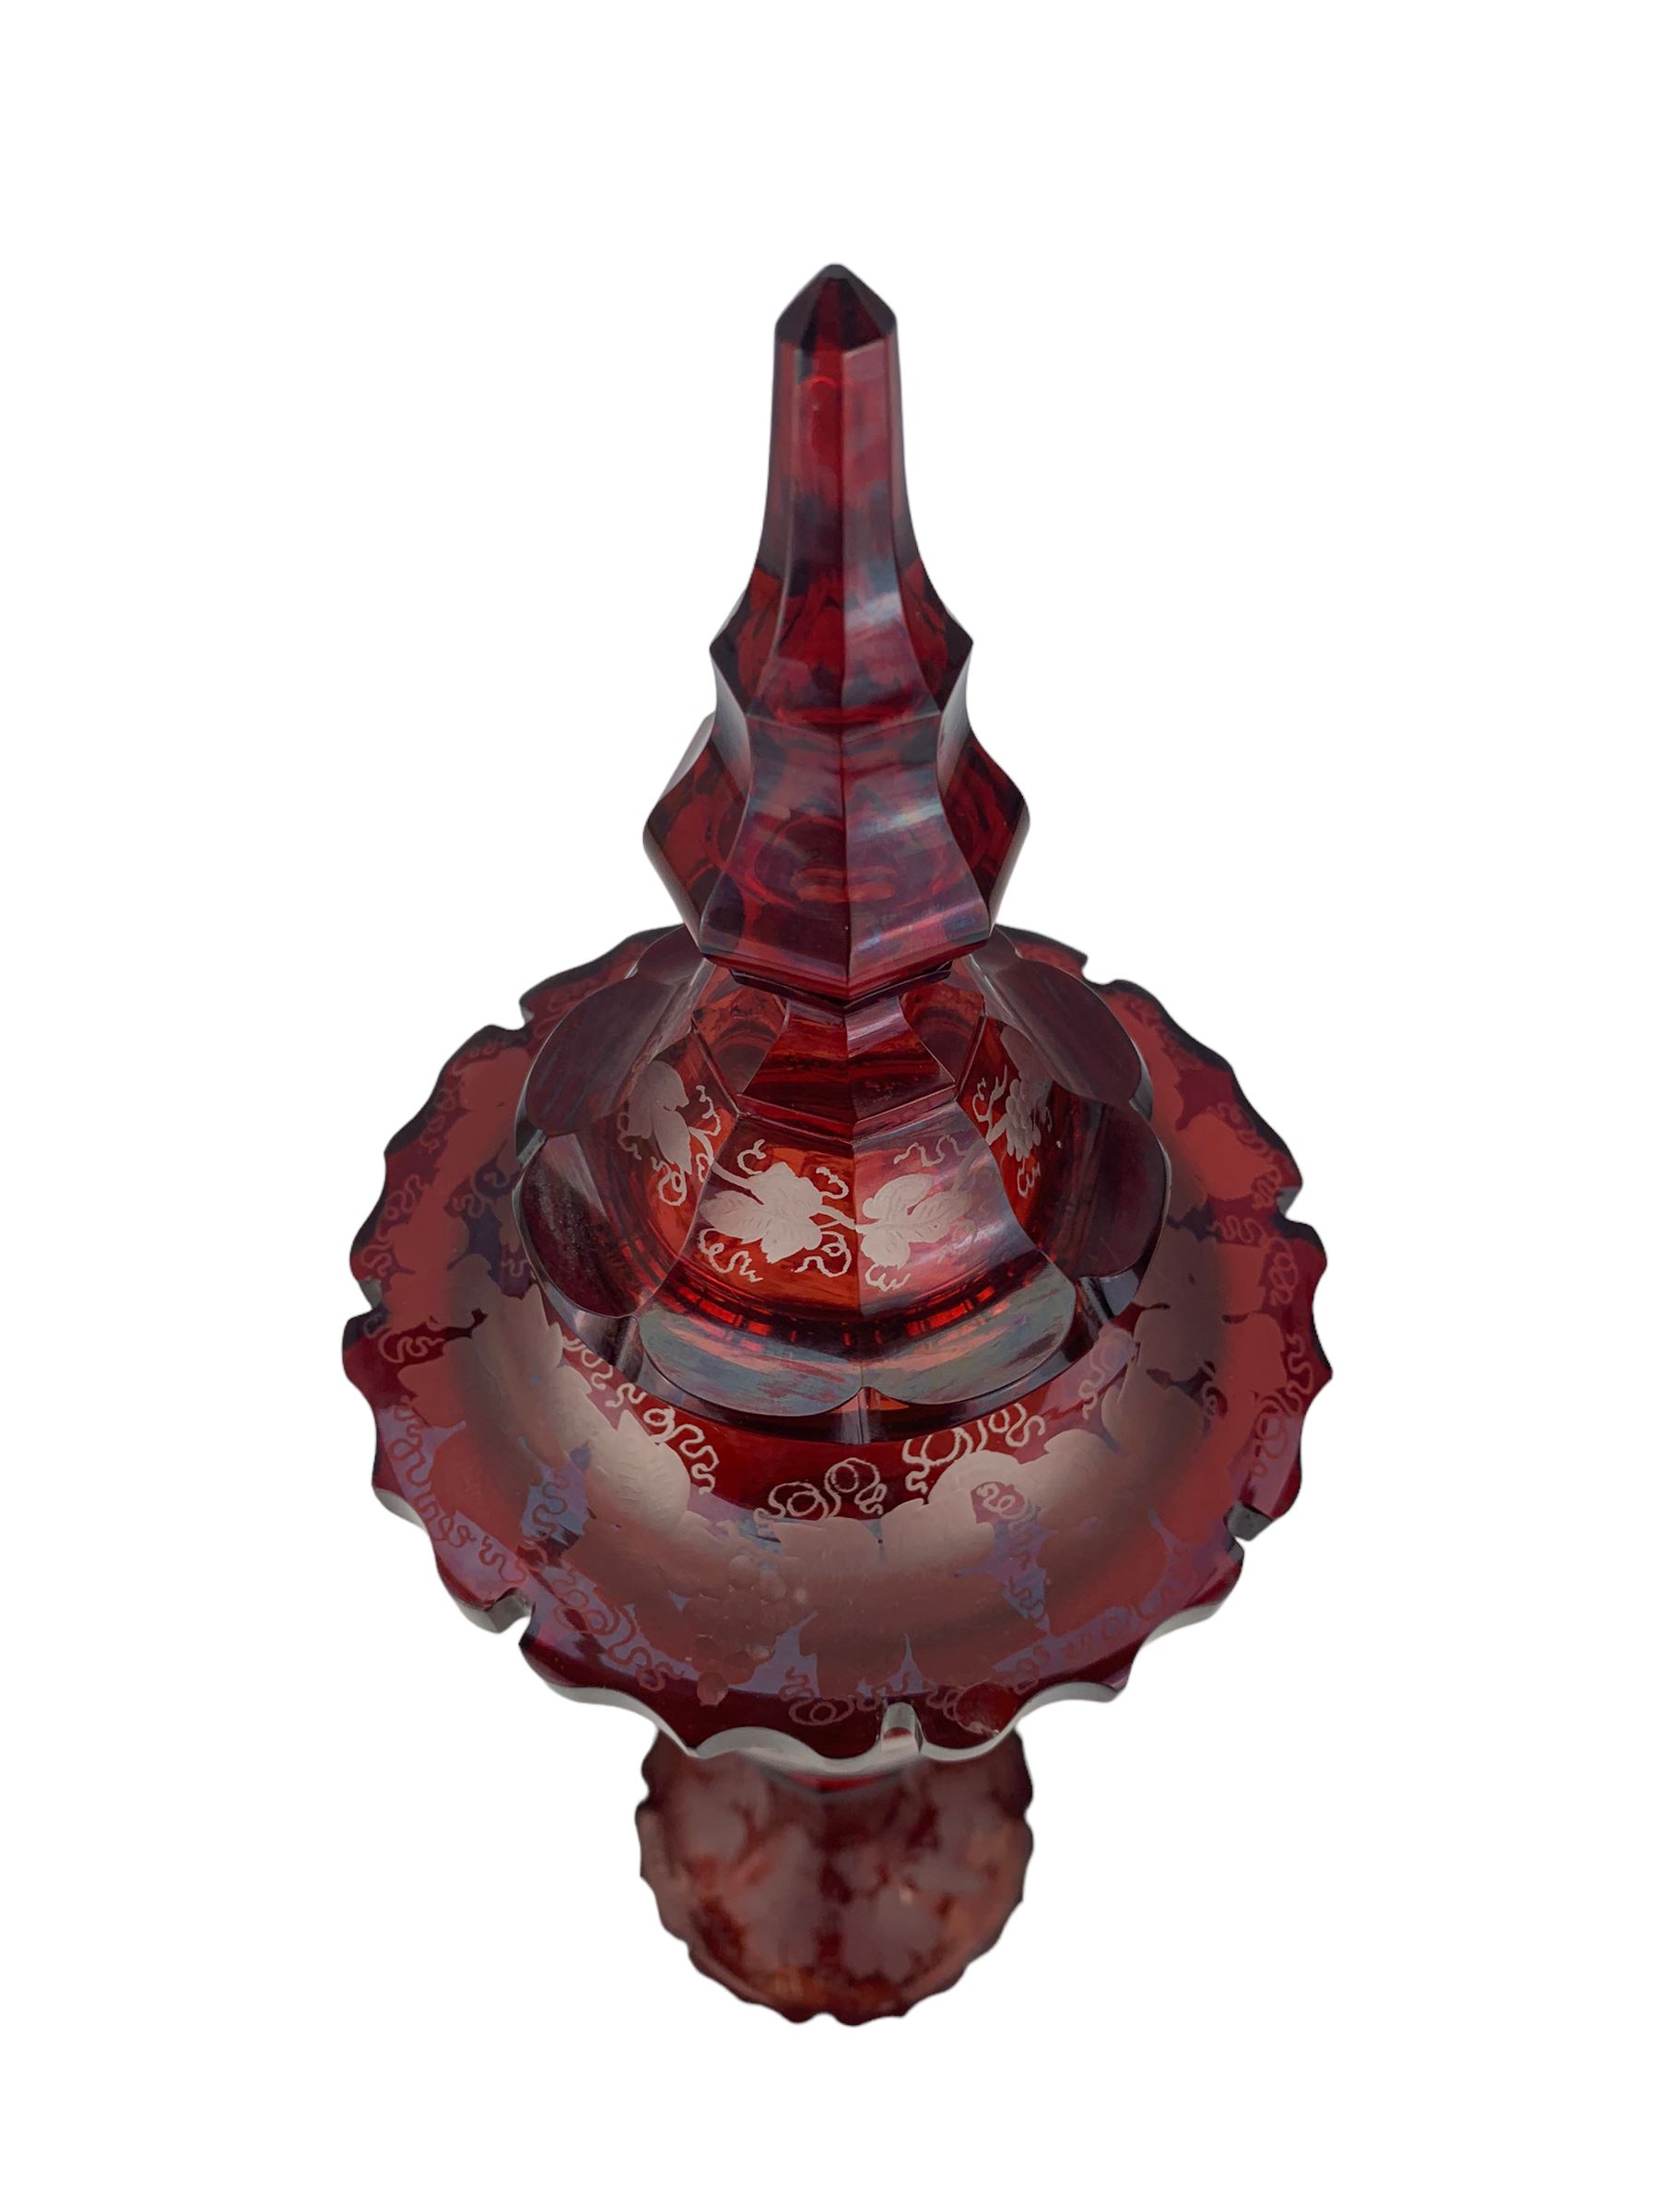 19th century Bohemian ruby overlay glass goblet vase and cover - Image 5 of 8